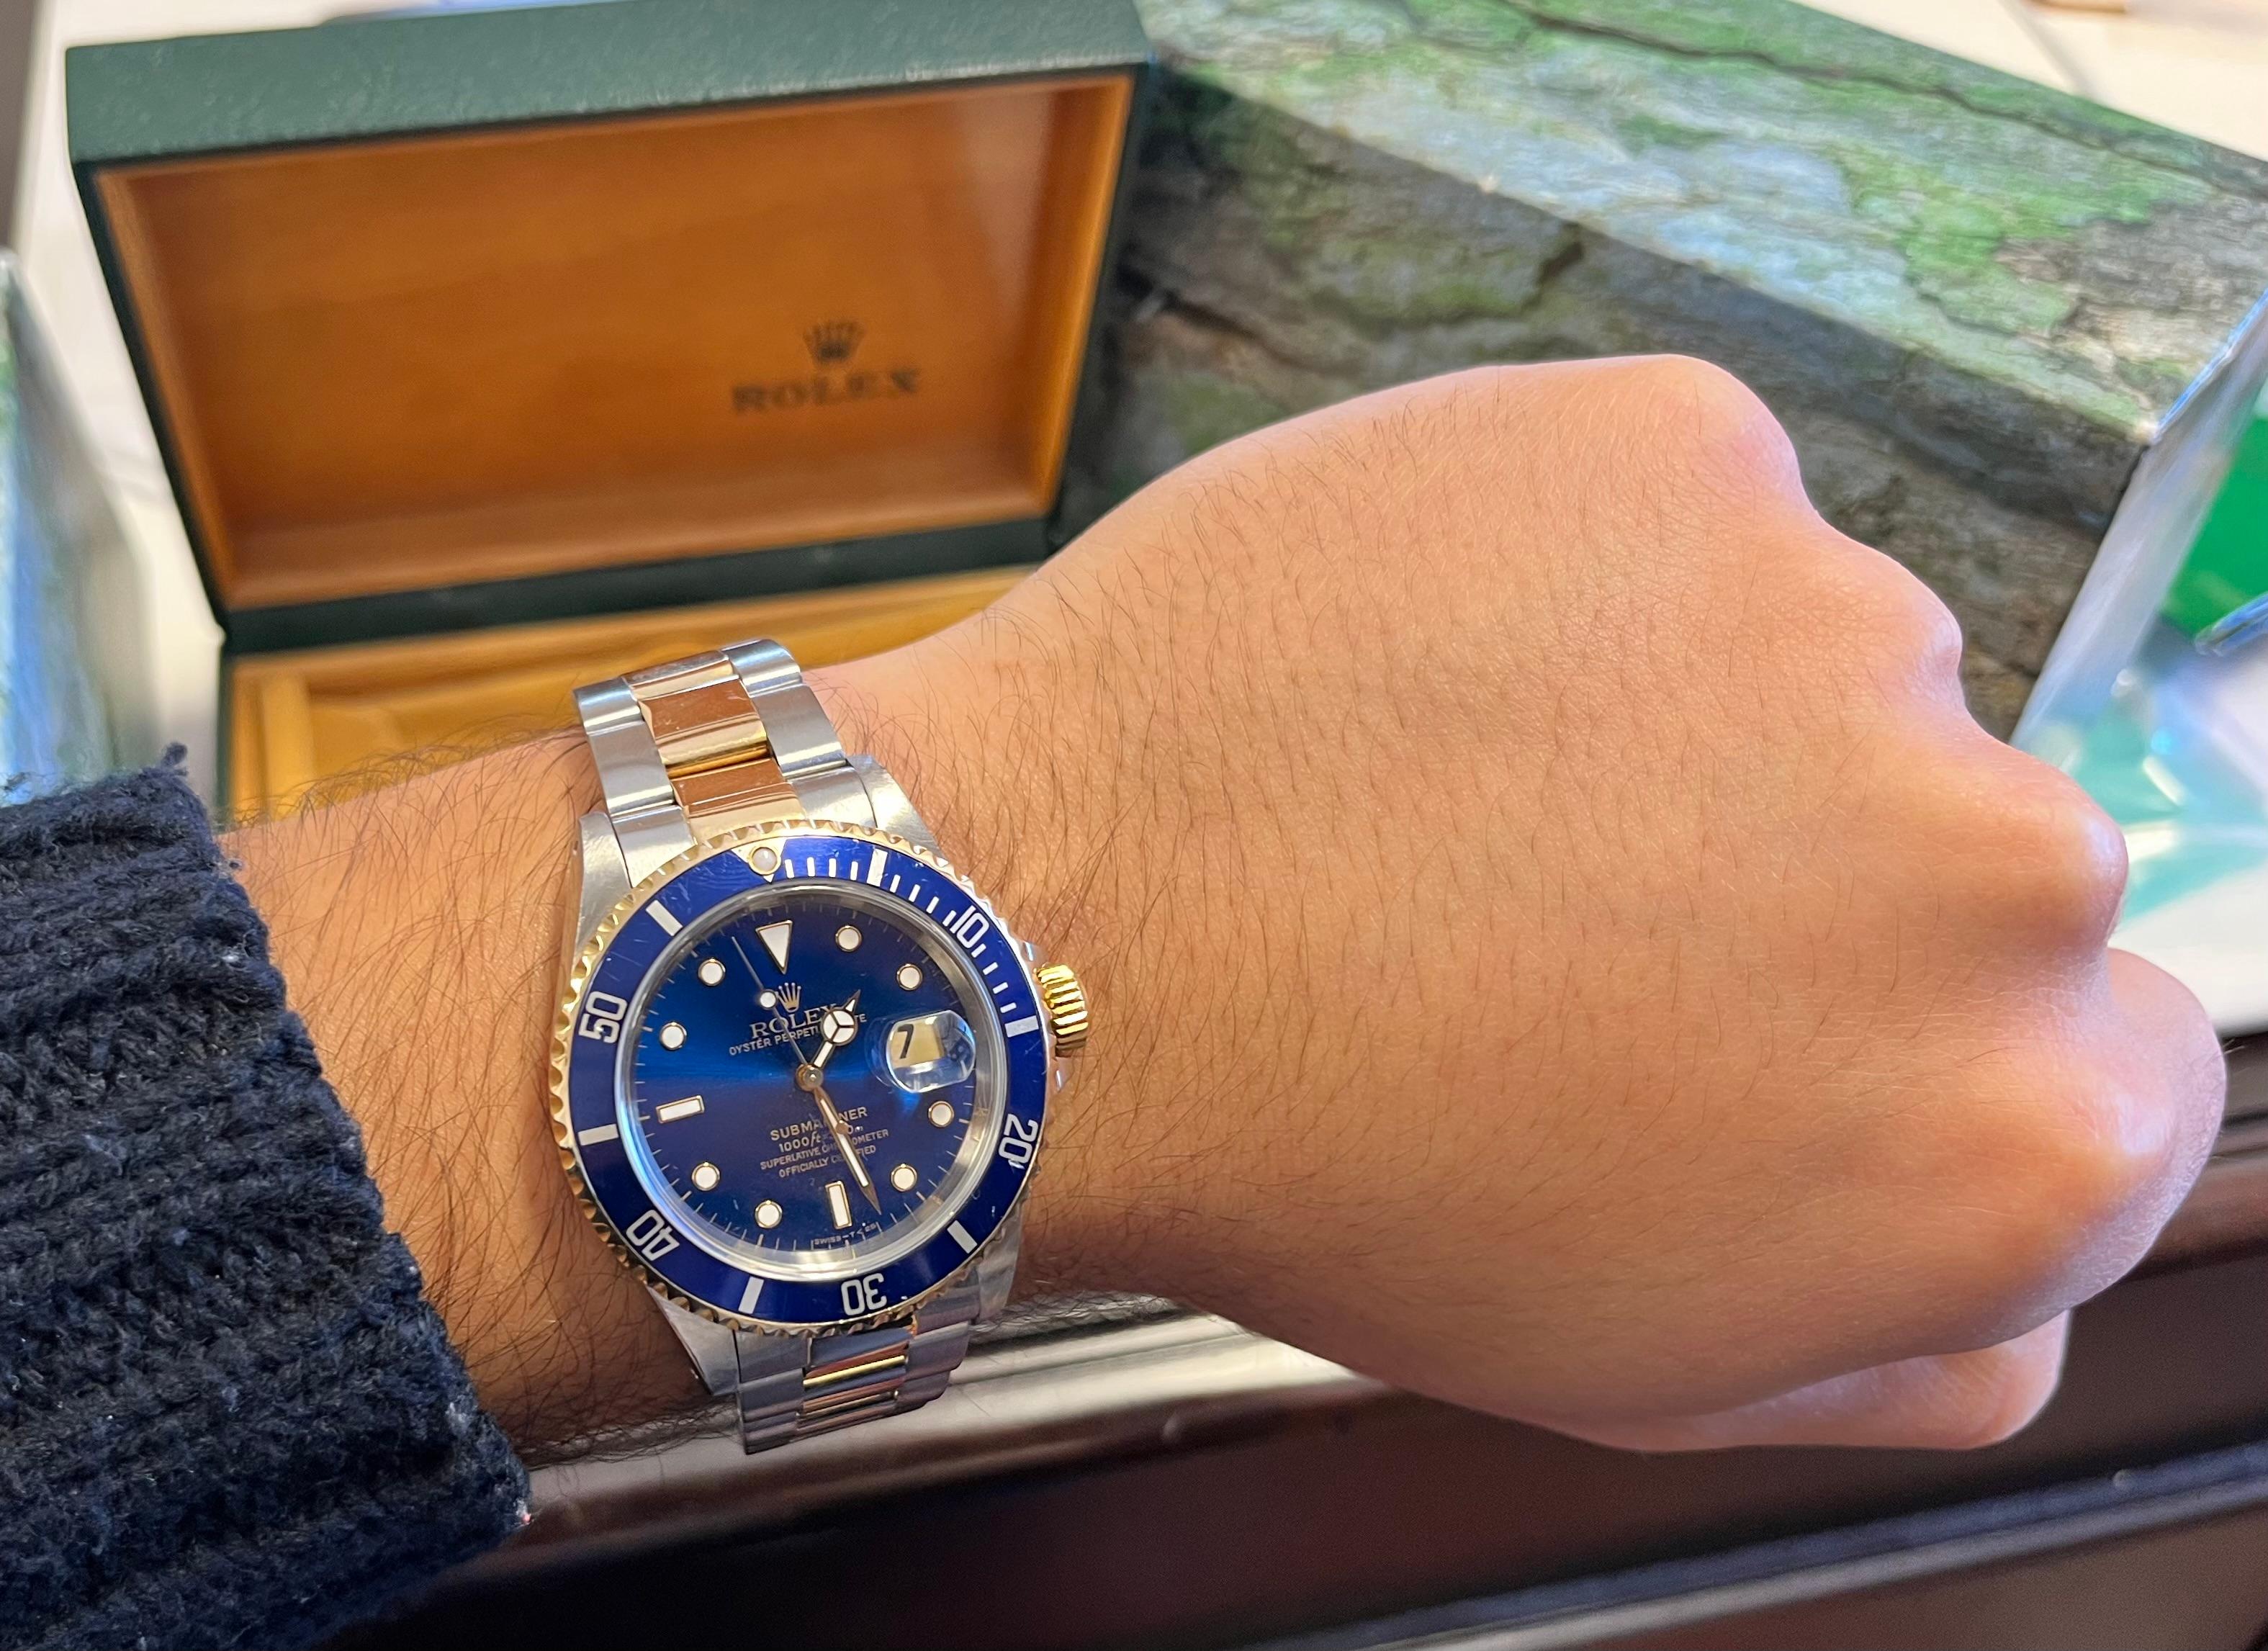 Rolex Blue Face Submariner Ref. 16613 in two-tone Rolex Oyster band. This Rolex Submariner has an adjustable clasp closure, allowing for a comfortable fit on the wrist from sizes 7 to 8.5 inches. Complete with original Submariner box. We priced this